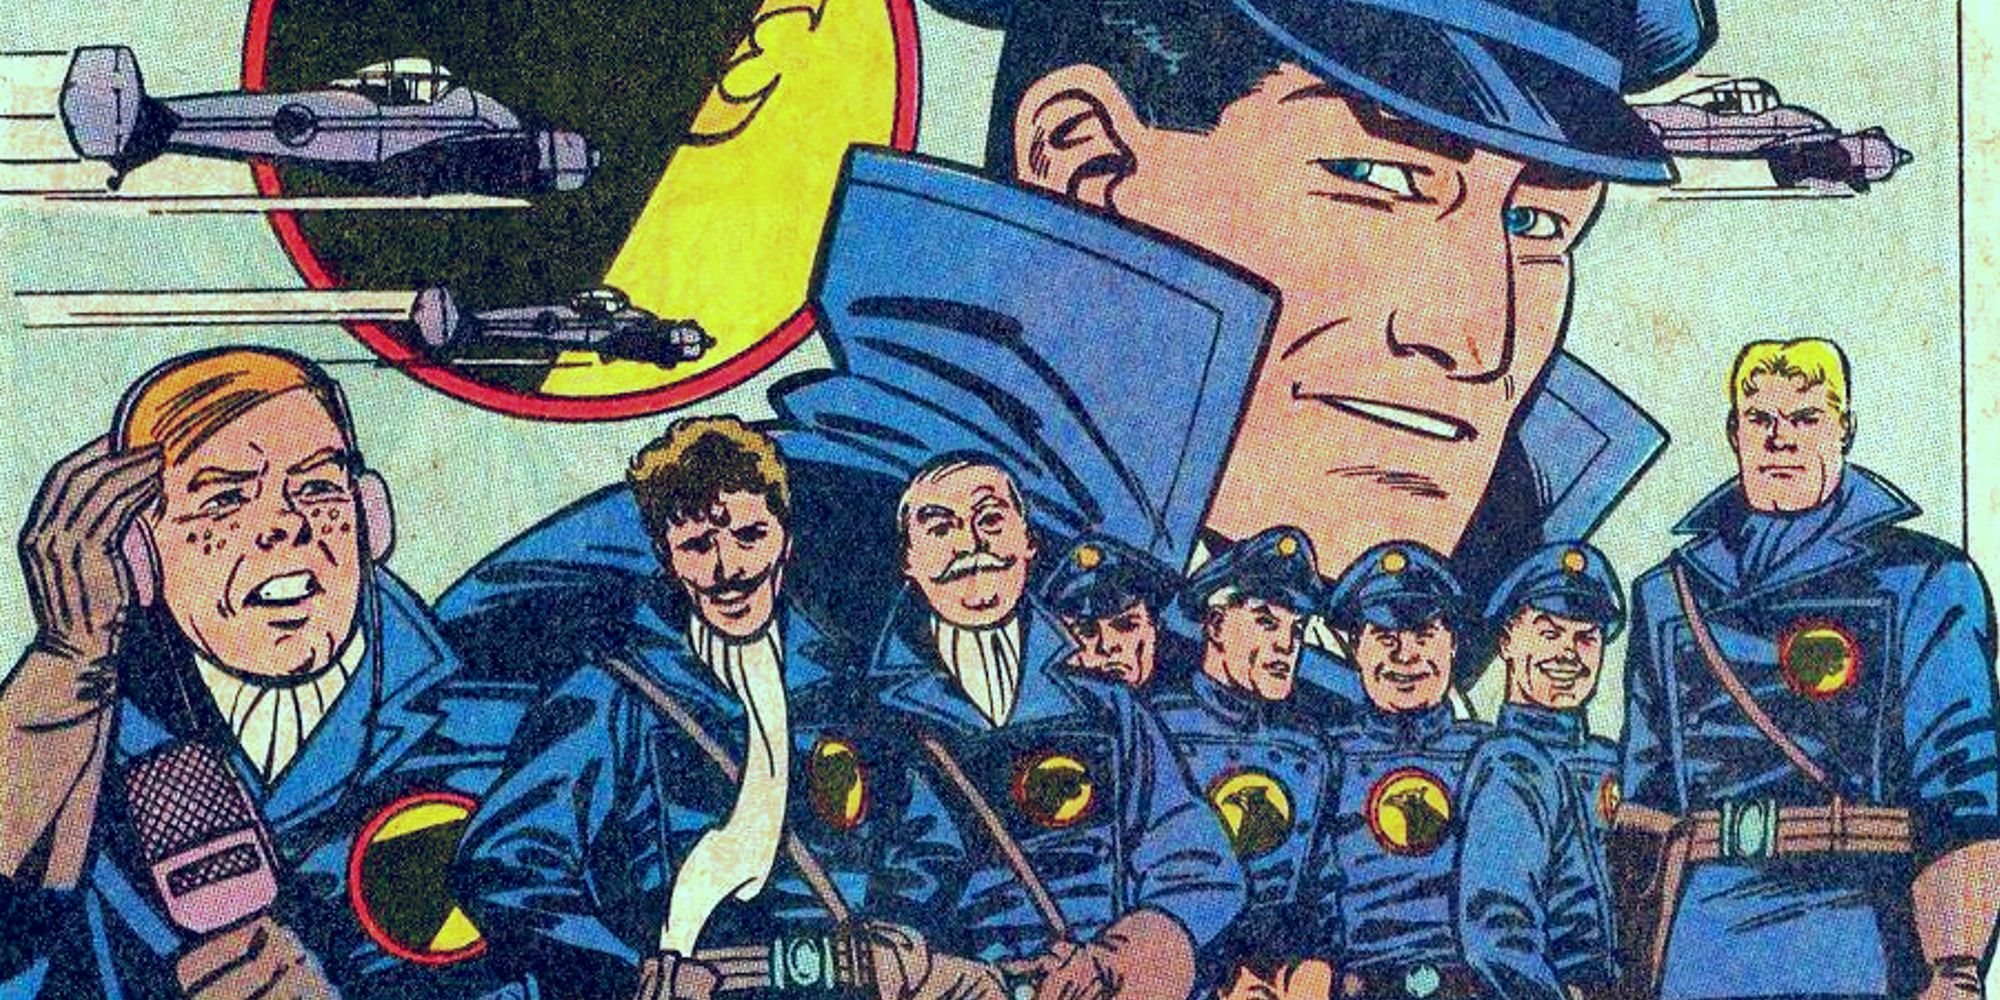 Steven Spielberg's Lost Comic Book Movie Is More Painful Thanks To His $500m War Epic